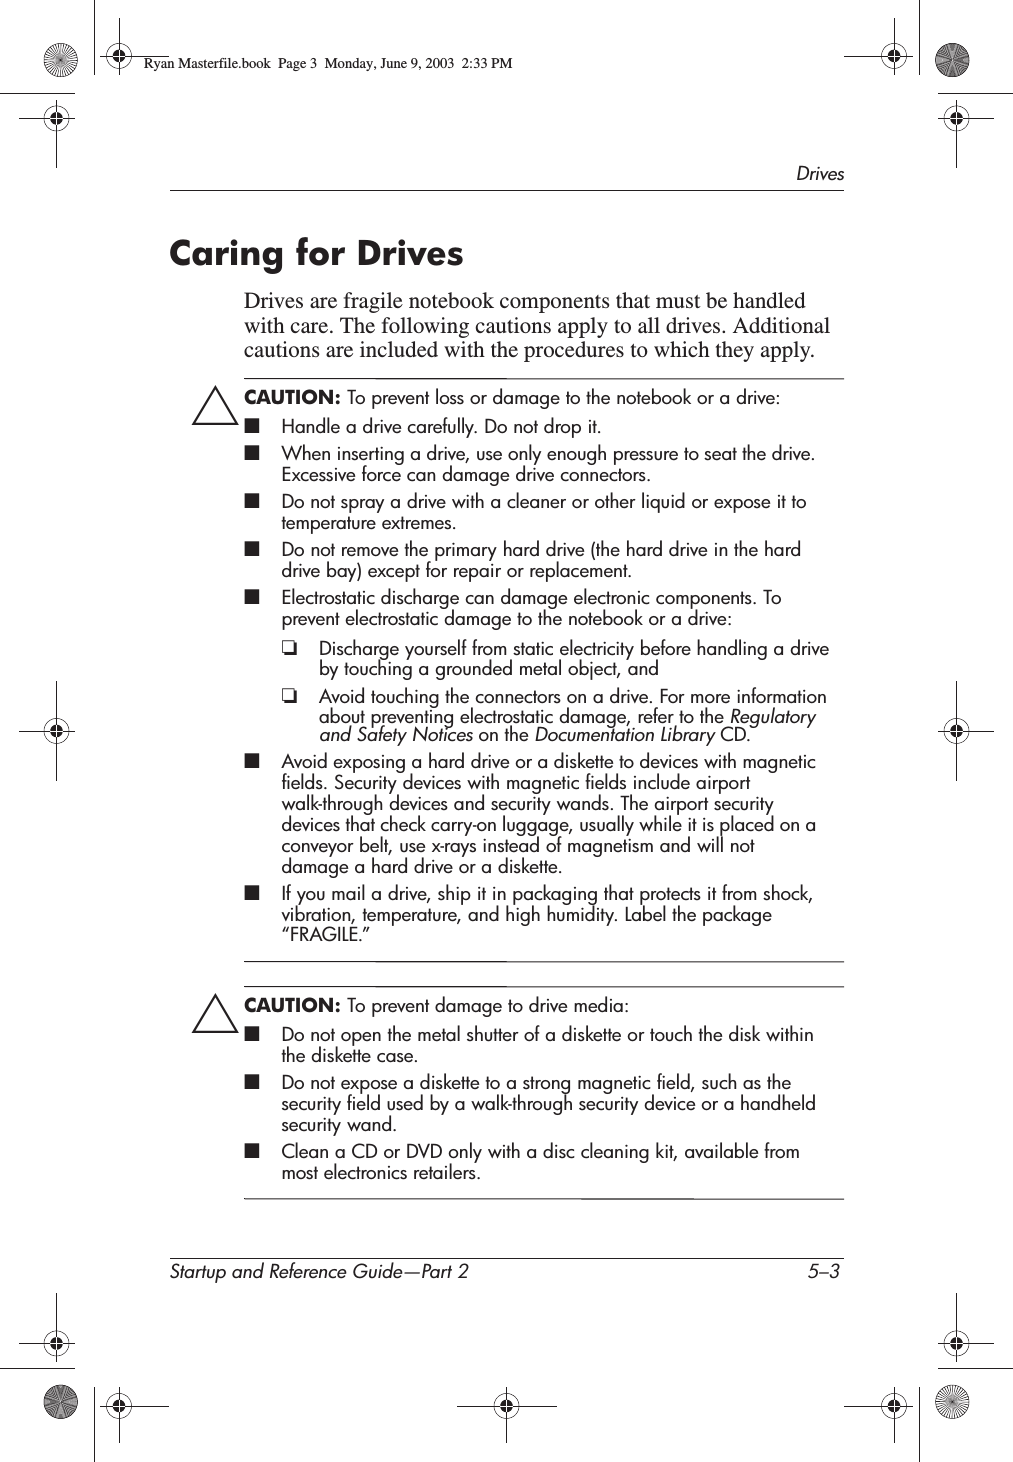 DrivesStartup and Reference Guide—Part 2 5–3Caring for DrivesDrives are fragile notebook components that must be handled with care. The following cautions apply to all drives. Additional cautions are included with the procedures to which they apply.ÄCAUTION: To prevent loss or damage to the notebook or a drive:■Handle a drive carefully. Do not drop it.■When inserting a drive, use only enough pressure to seat the drive. Excessive force can damage drive connectors.■Do not spray a drive with a cleaner or other liquid or expose it to temperature extremes.■Do not remove the primary hard drive (the hard drive in the hard drive bay) except for repair or replacement.■Electrostatic discharge can damage electronic components. To prevent electrostatic damage to the notebook or a drive:❏Discharge yourself from static electricity before handling a drive by touching a grounded metal object, and❏Avoid touching the connectors on a drive. For more information about preventing electrostatic damage, refer to the Regulatory and Safety Notices on the Documentation Library CD.■Avoid exposing a hard drive or a diskette to devices with magnetic fields. Security devices with magnetic fields include airport walk-through devices and security wands. The airport security devices that check carry-on luggage, usually while it is placed on a conveyor belt, use x-rays instead of magnetism and will not damage a hard drive or a diskette.■If you mail a drive, ship it in packaging that protects it from shock, vibration, temperature, and high humidity. Label the package “FRAGILE.”ÄCAUTION: To prevent damage to drive media:■Do not open the metal shutter of a diskette or touch the disk within the diskette case.■Do not expose a diskette to a strong magnetic field, such as the security field used by a walk-through security device or a handheld security wand.■Clean a CD or DVD only with a disc cleaning kit, available from most electronics retailers.Ryan Masterfile.book  Page 3  Monday, June 9, 2003  2:33 PM